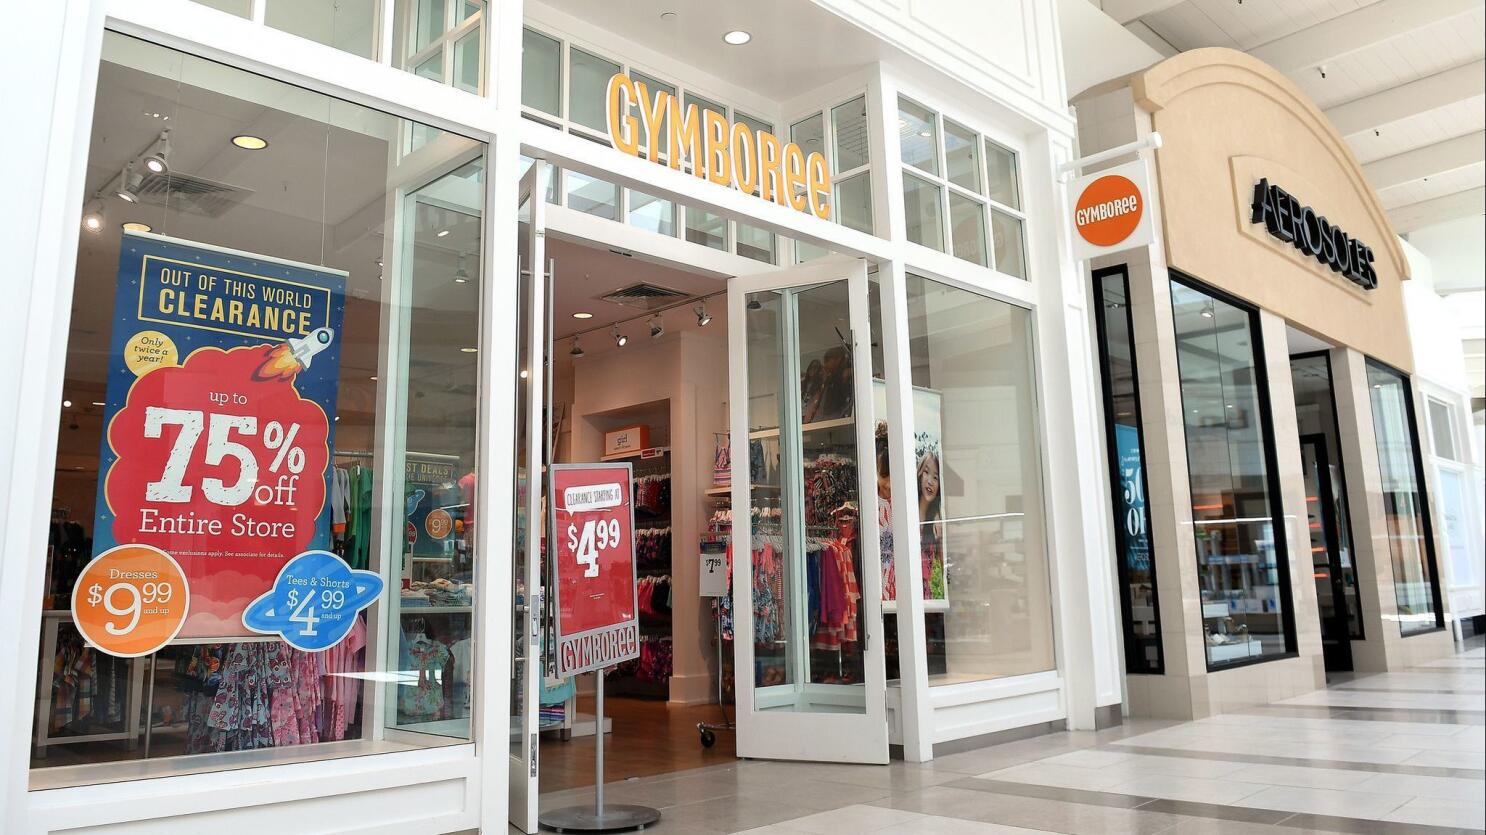 Gymboree is back at Capital City Mall! - Capital City Mall